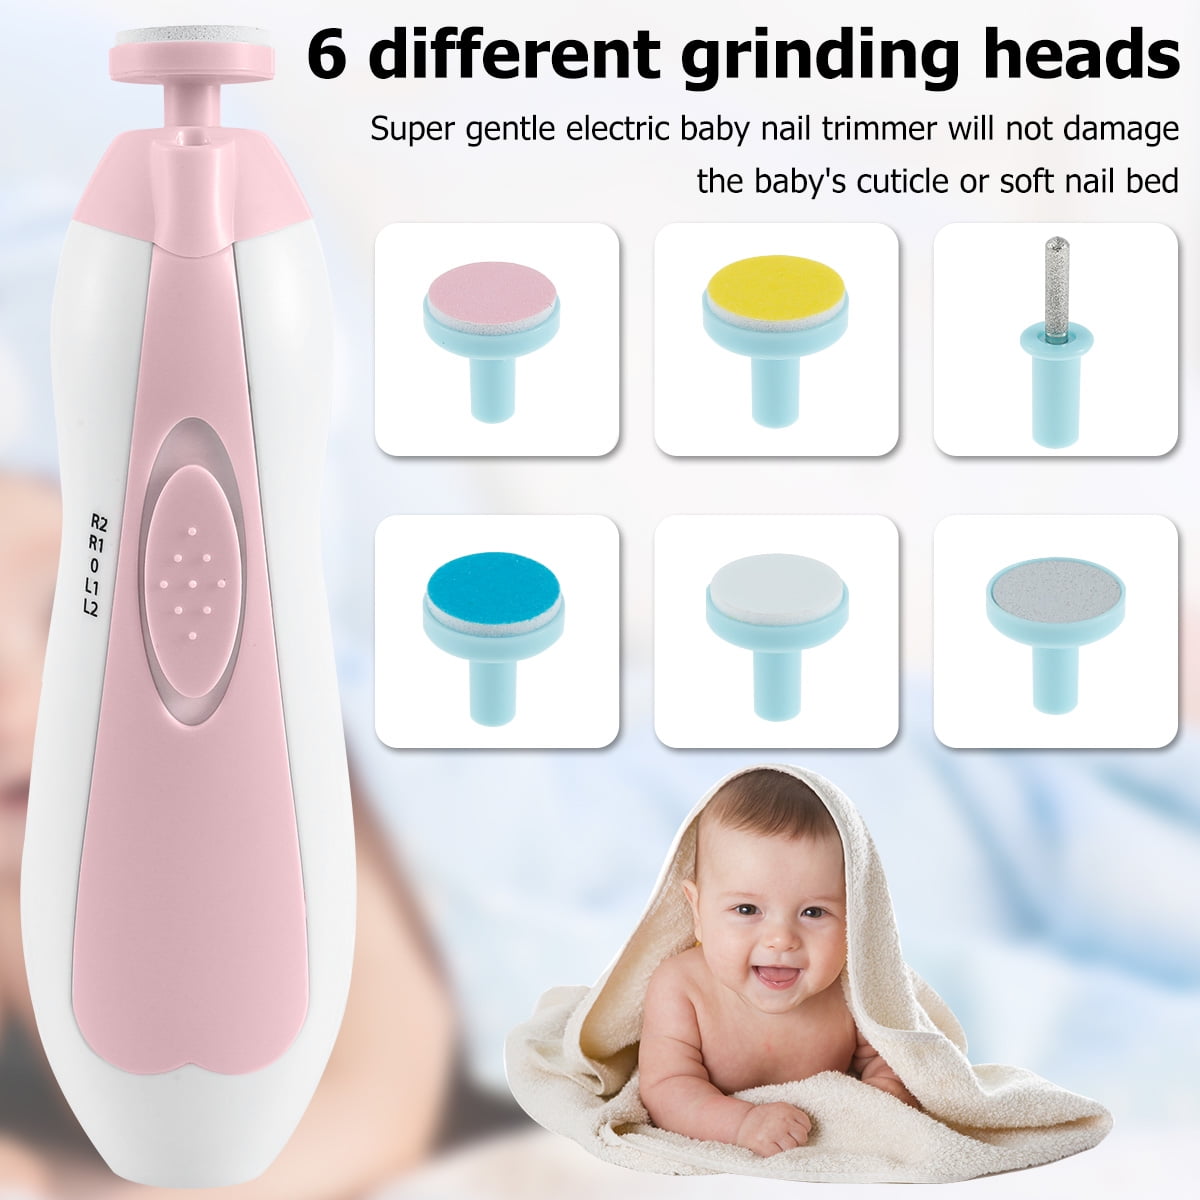 Adnate Newborn Baby Nail Trimmer Filer | Electric with 6 Kid-Safe Grinding  Heads | - Price in India, Buy Adnate Newborn Baby Nail Trimmer Filer |  Electric with 6 Kid-Safe Grinding Heads |